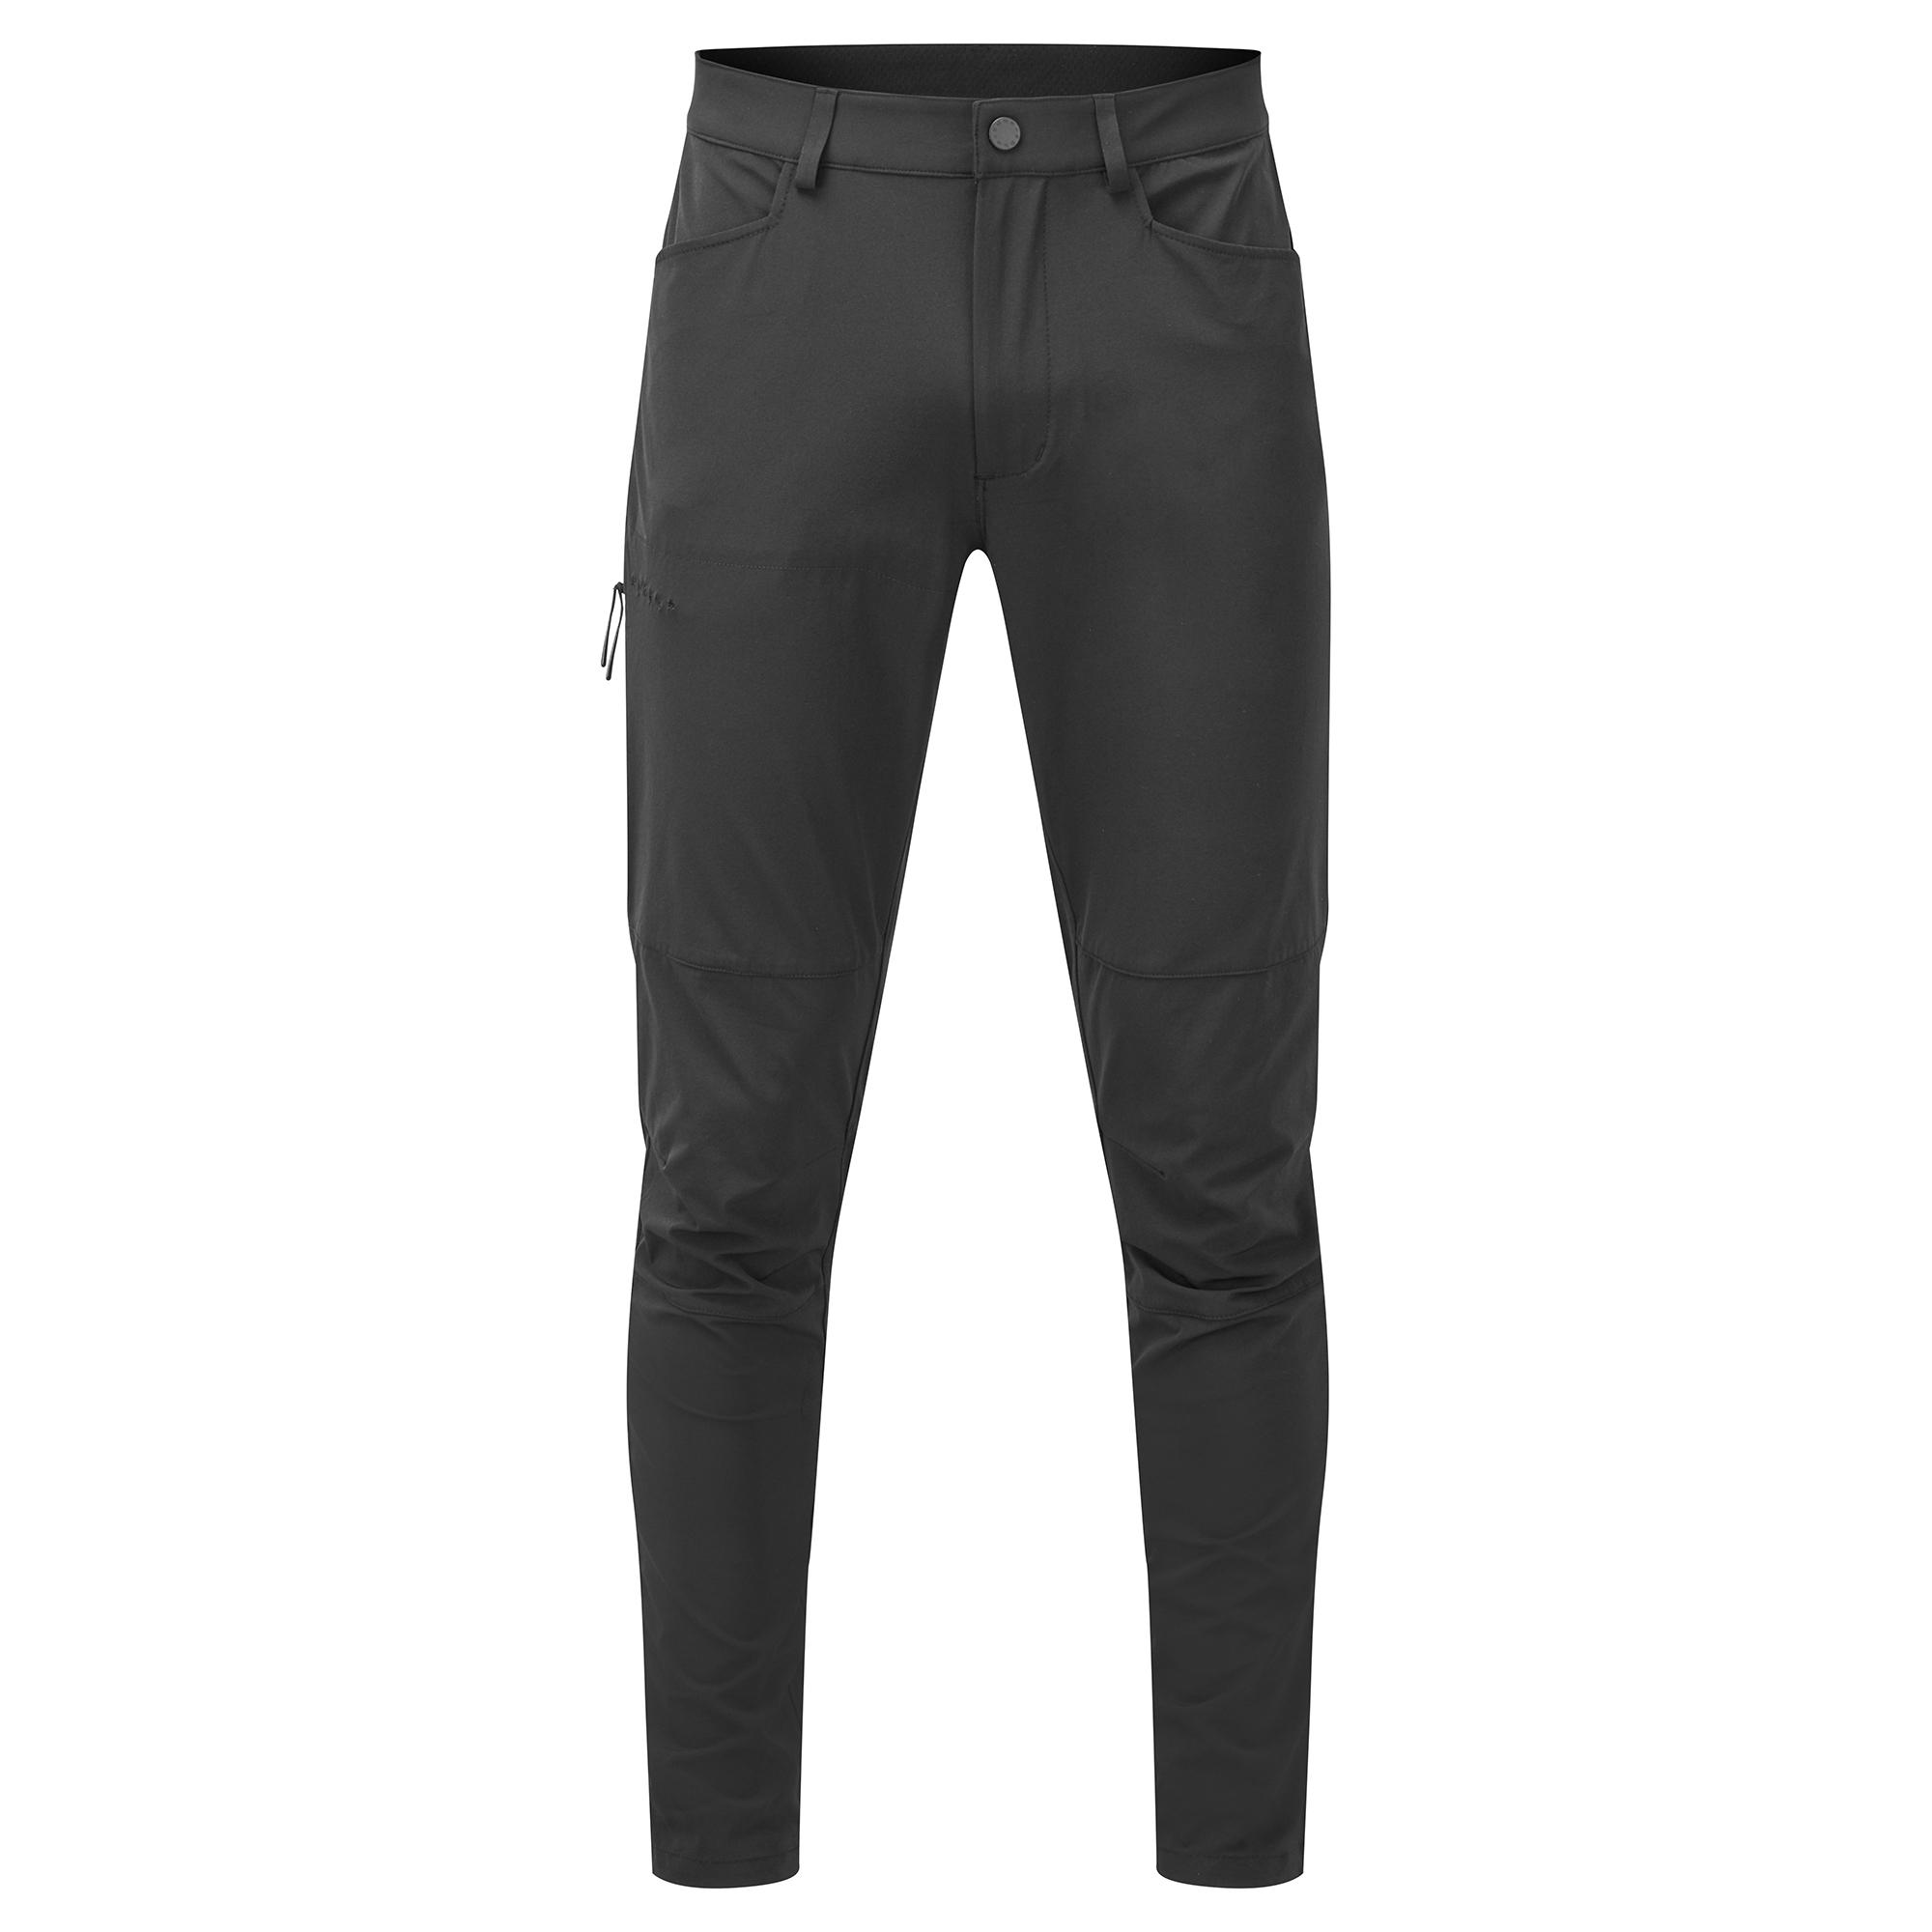 Fhn Mens Lightweight Trail Trousers - Black